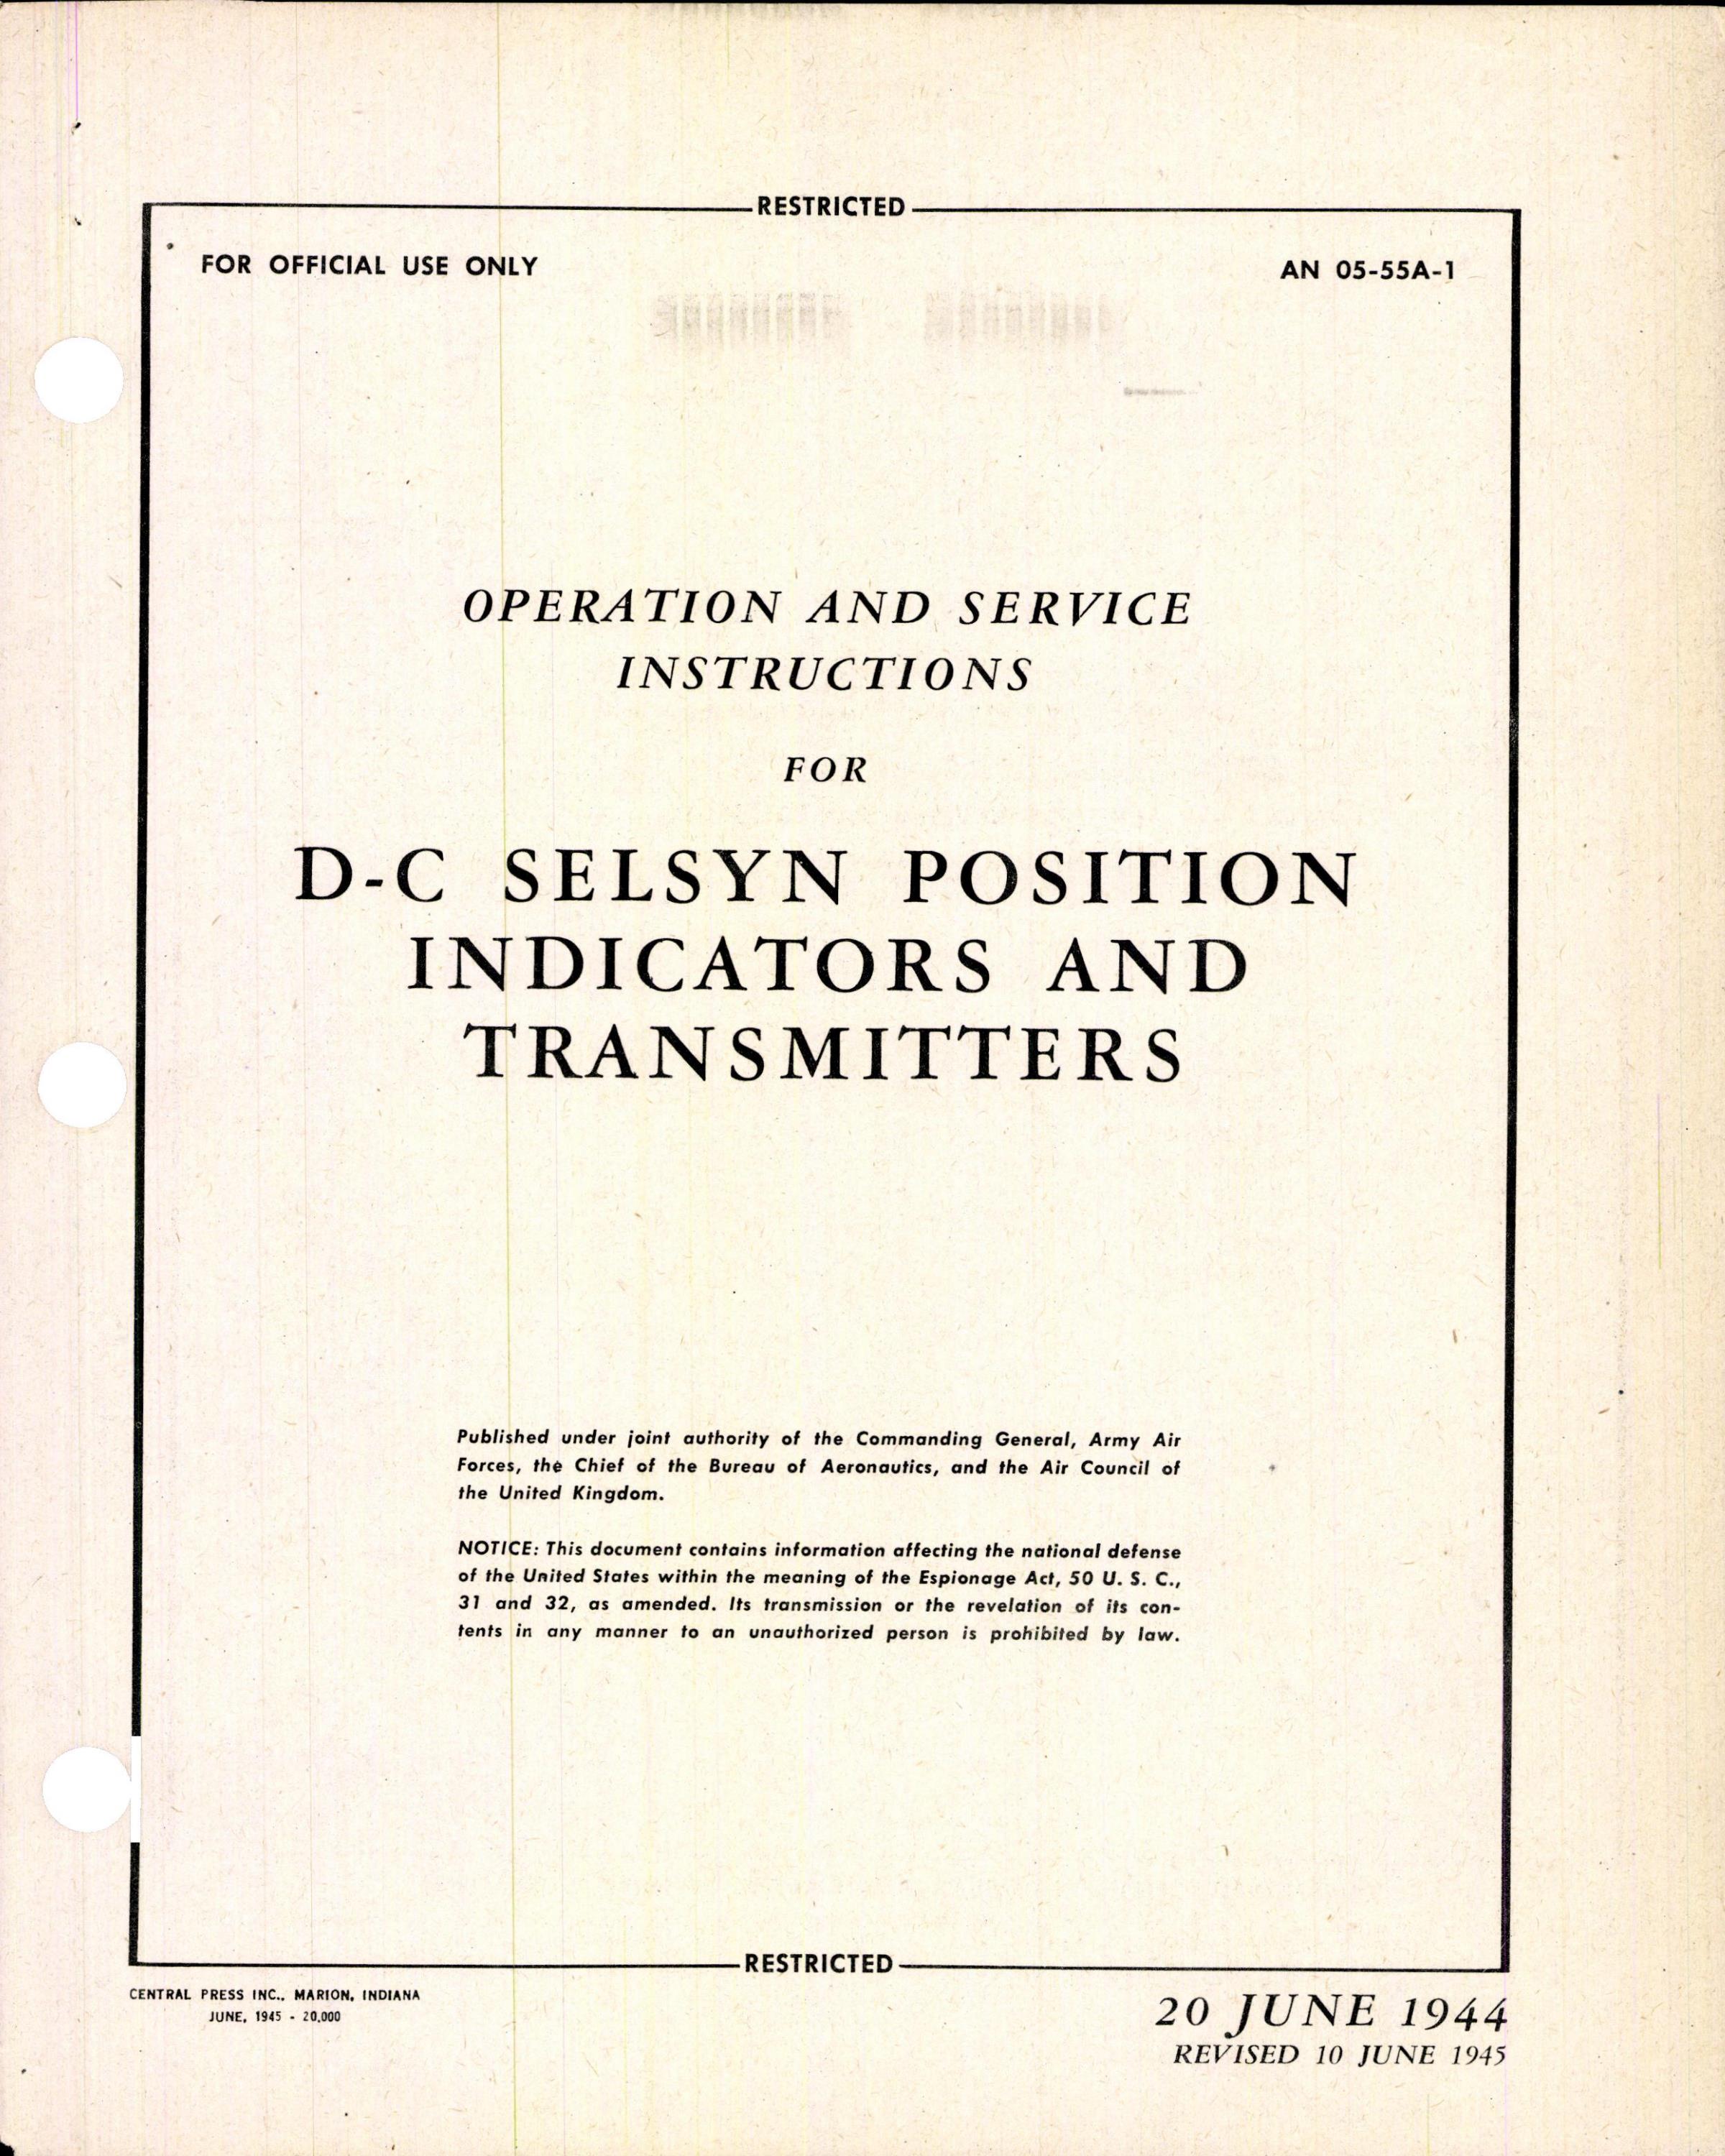 Sample page 1 from AirCorps Library document: D-C Selsyn Position Indicators and Transmitters